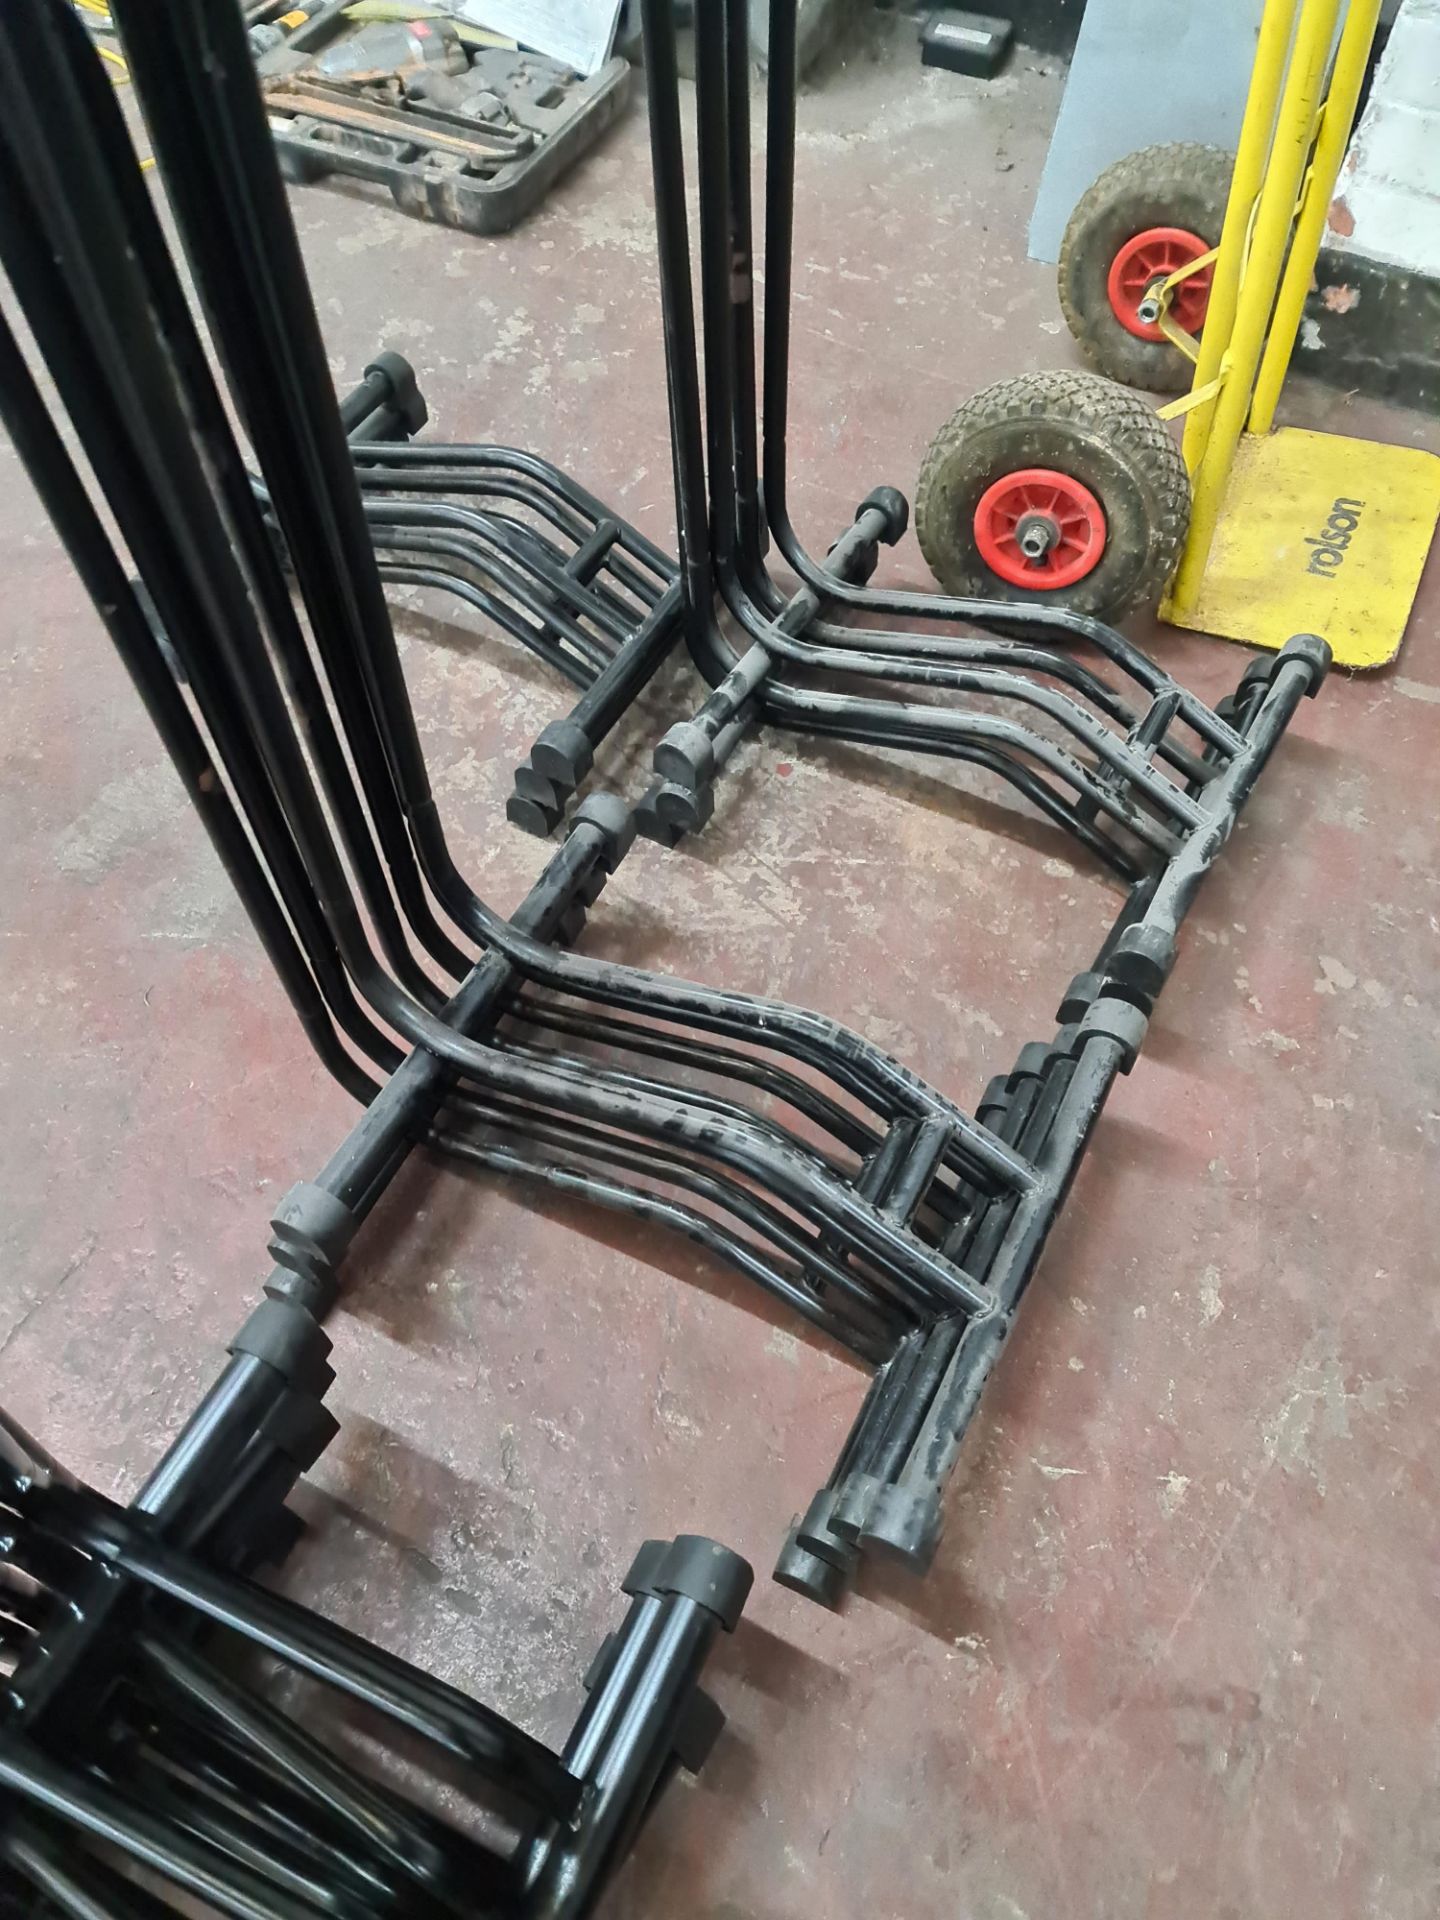 4 off bike stands - Image 2 of 3